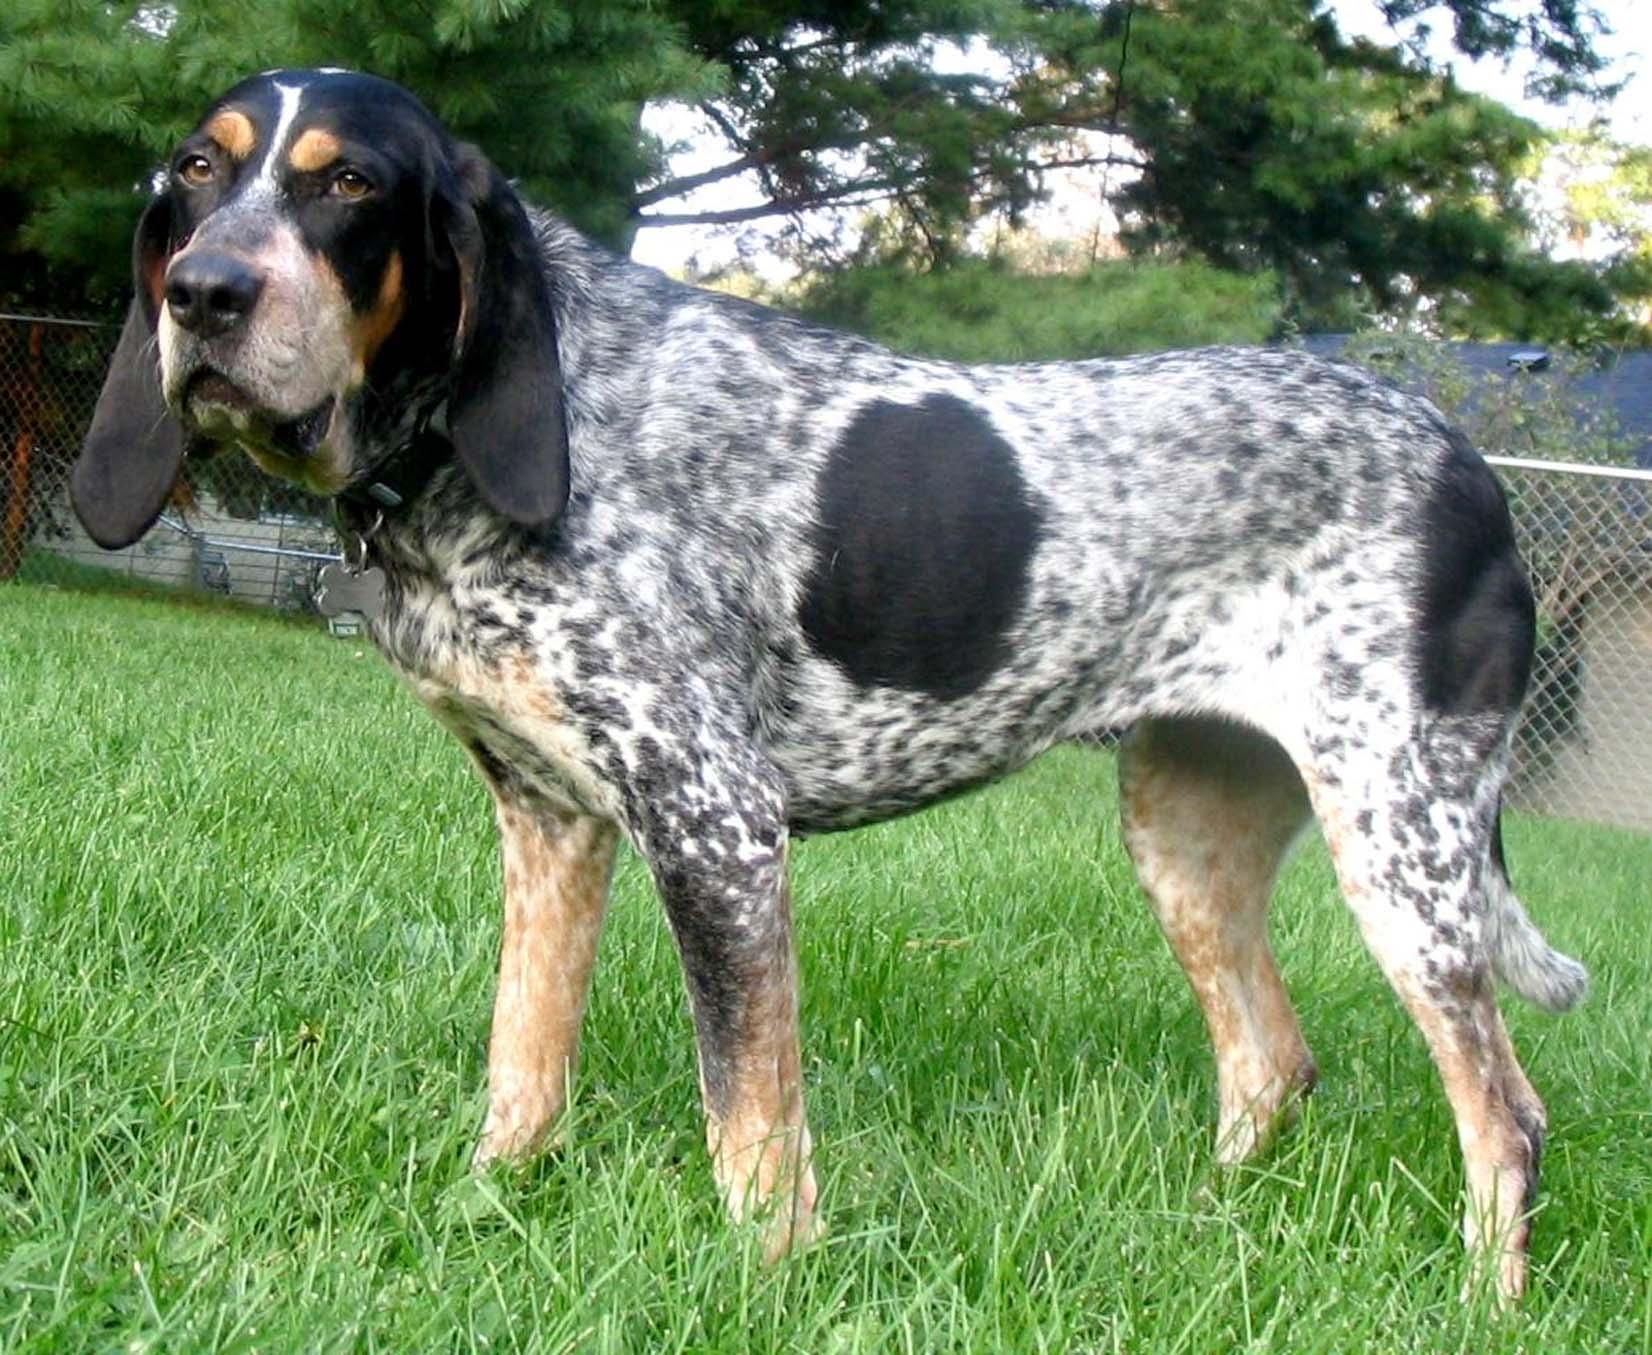 Bluetick Coonhound dog photo and wallpaper. Beautiful Bluetick Coonhound dog picture